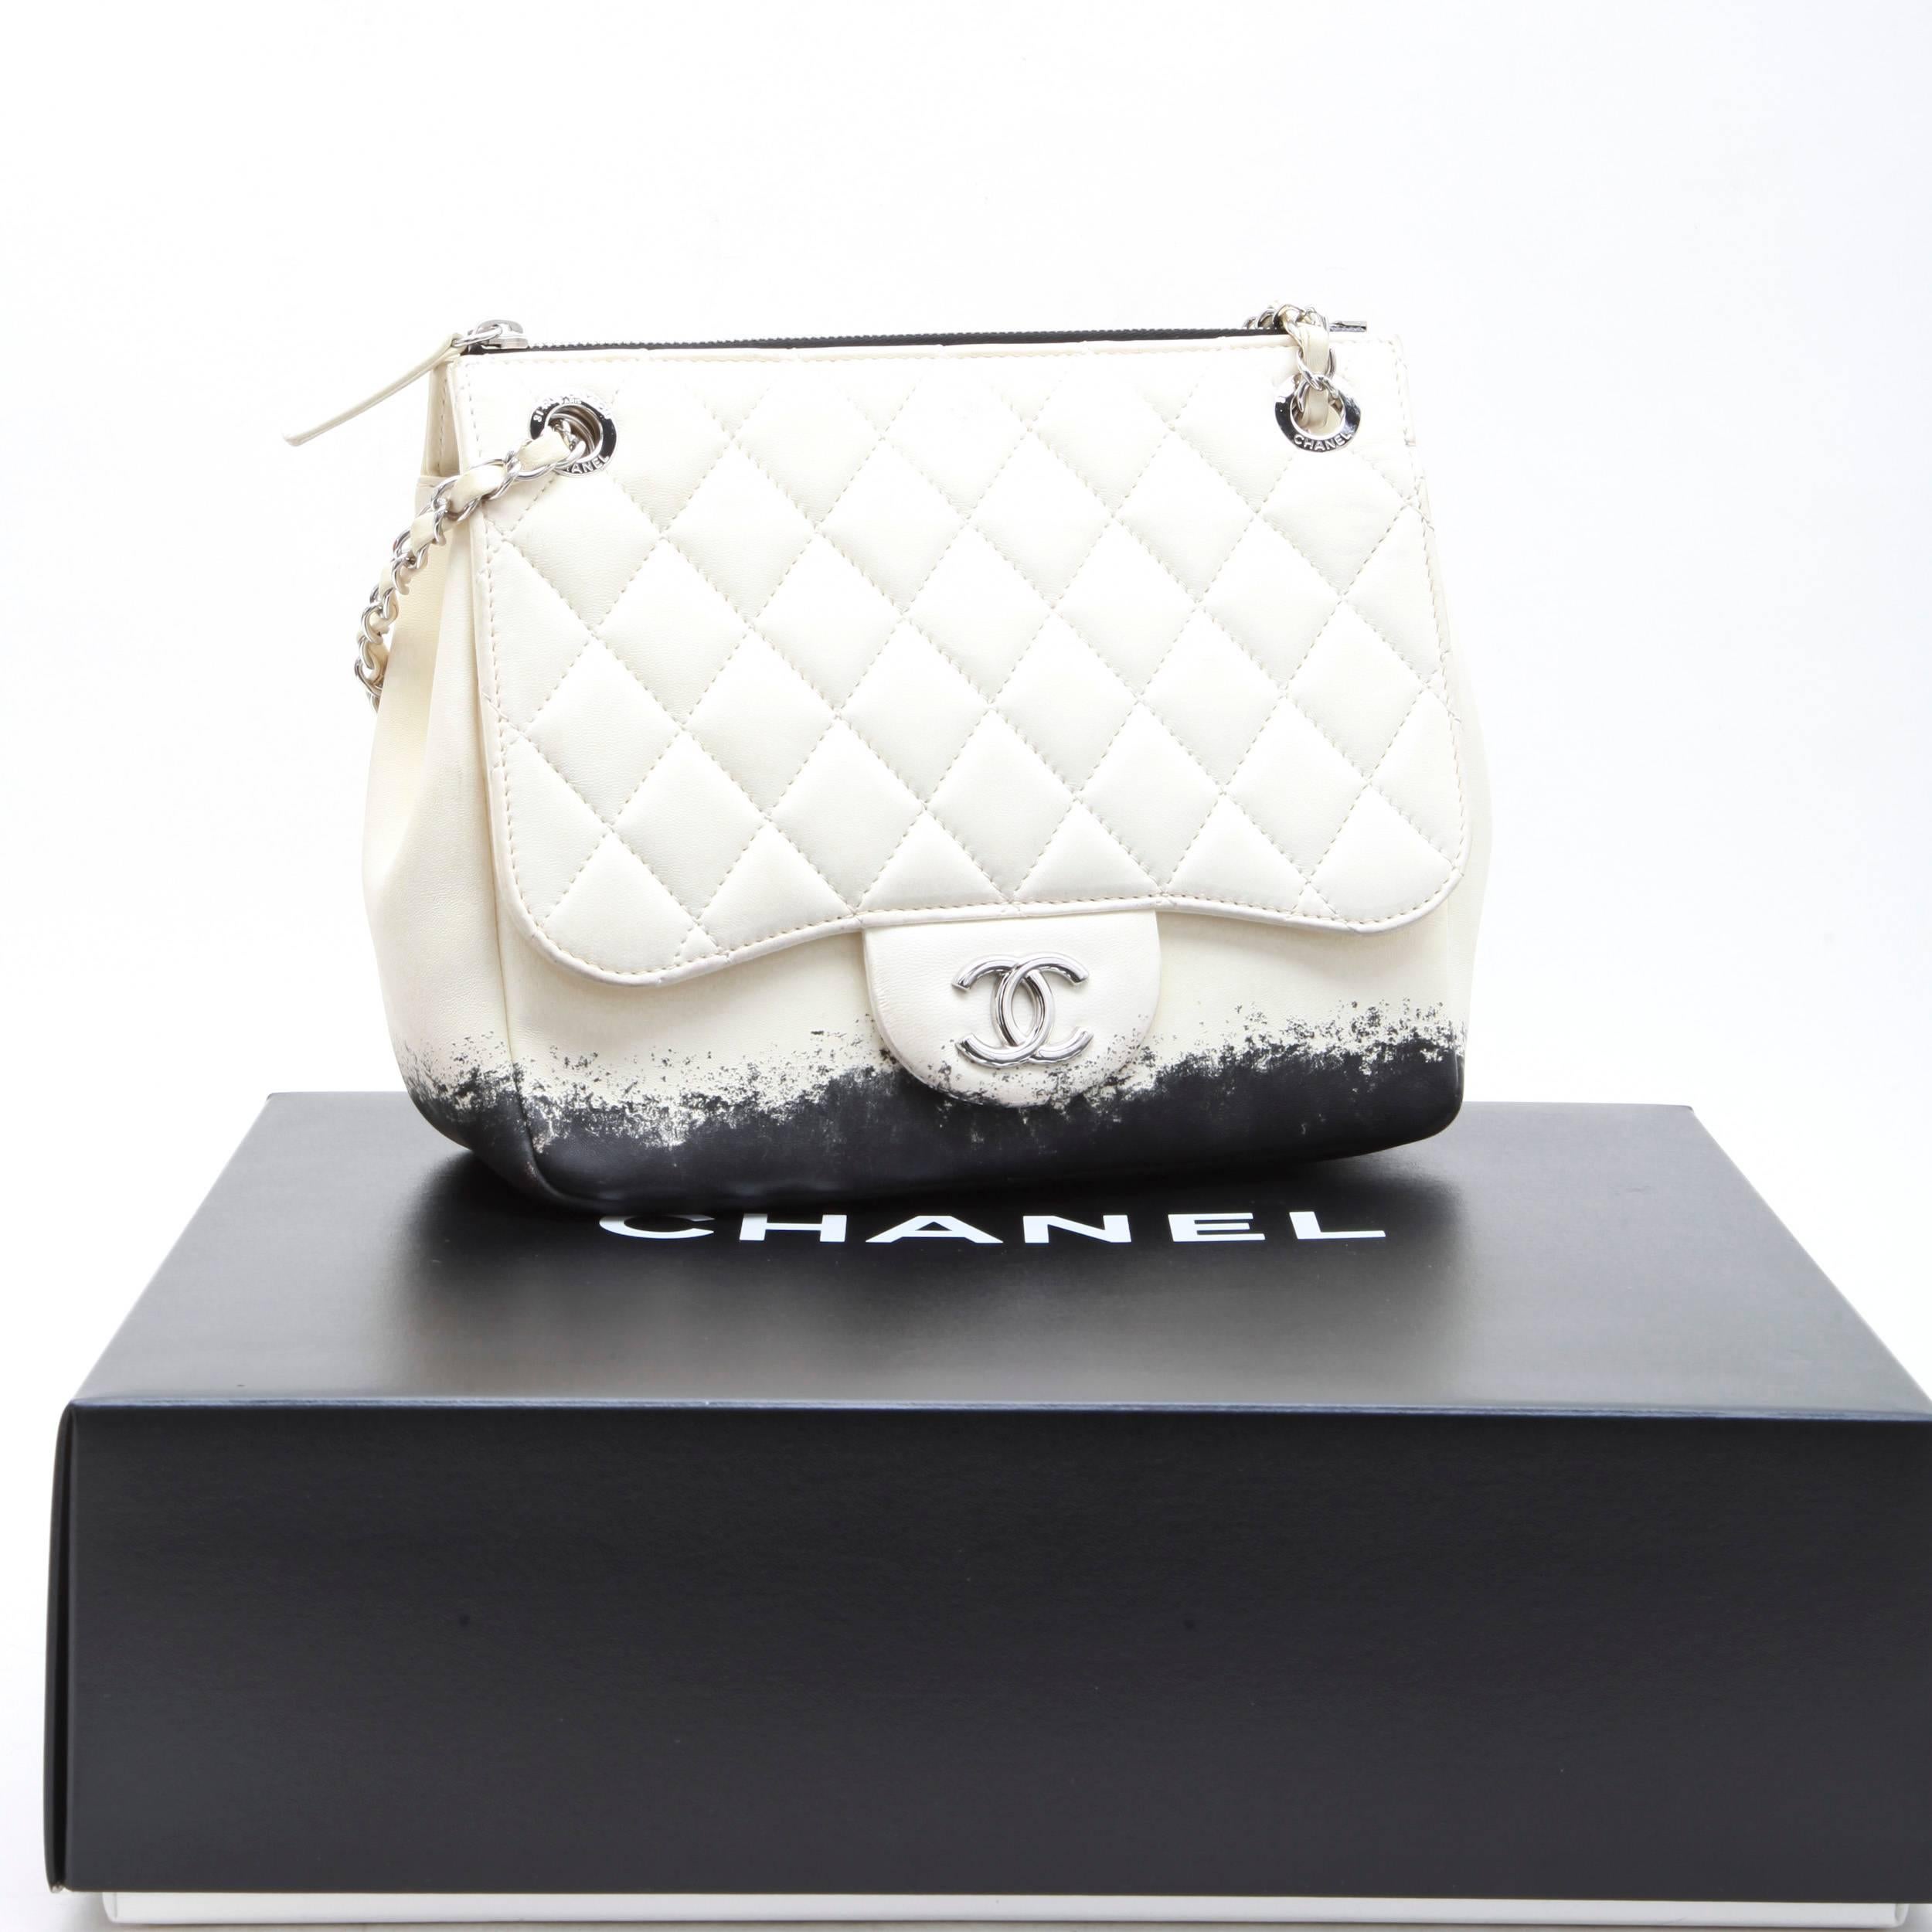 CHANEL Bag in Beige and Black Lamb Leather 2